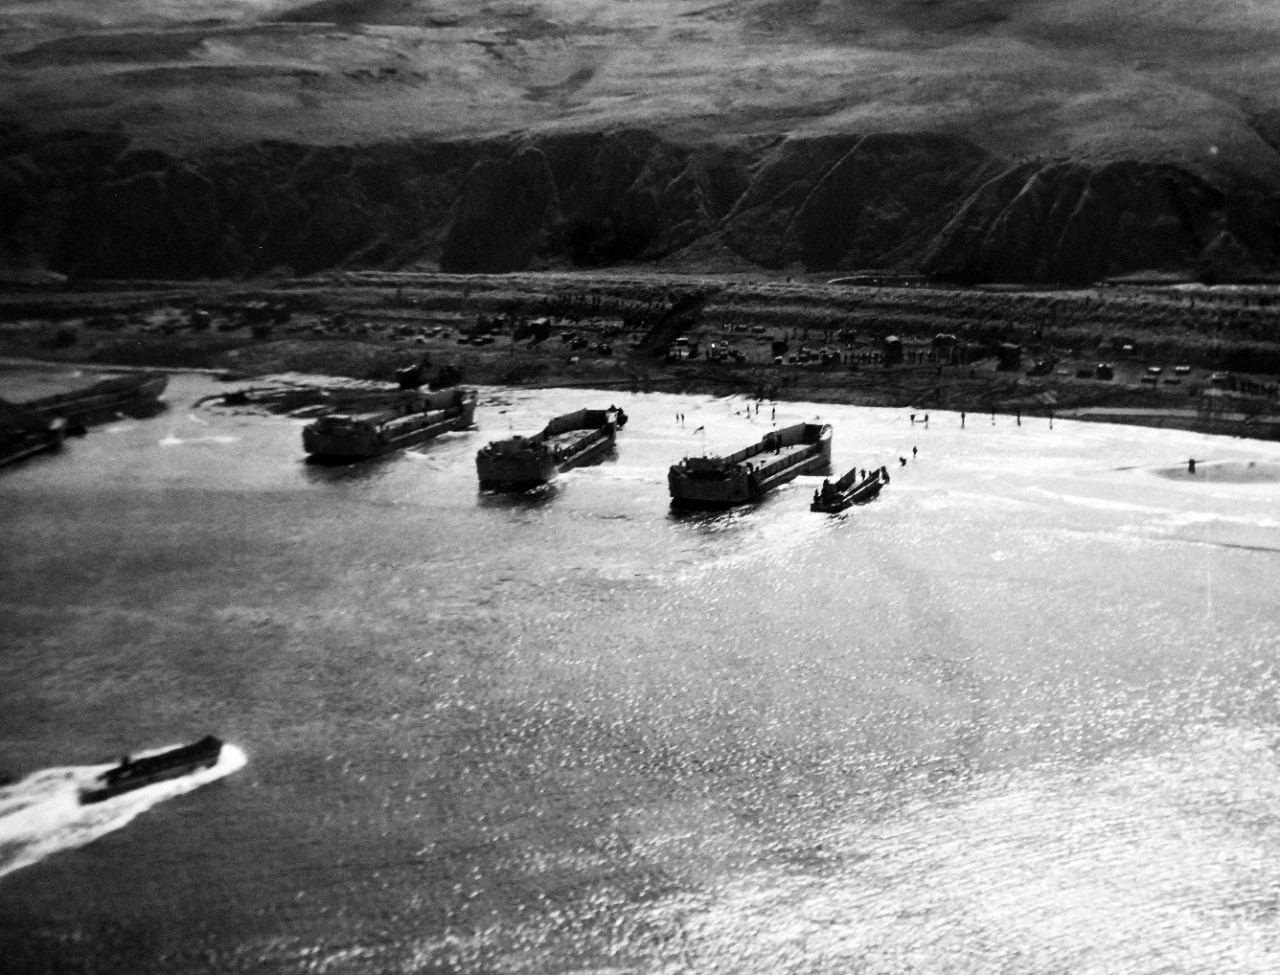 LC-Lot-803-10:  Aleutian Islands Campaign, June 1942 - August 1943.   Allied Invasion of Kiska, August 15-24, August 1943.  First photographs, landing operations, Kiska, August 15, 1943.   This remarkable photograph was taken by a US Navy Vega PV-1 “Ventura”, a patrol bomber operating as part of the air cover for the task force.   United States and Canadian troops swarming ashore from landing barges on a stretch of beach along the northwest coast of Kiska.  The man can be seen moving up the hillside like ants.  At this time, they did not know whether the Japanese were “playing possum” or not.  The barges backing away are the familiar LCTs, LCMs, and LCPs, which were also used in the Attu and Sicily Campaigns.  U.S. Navy photograph, released August 23, 1943.  Photographed through Mylar sleeve.  Courtesy of the Library of Congress.  (2015/11/06).